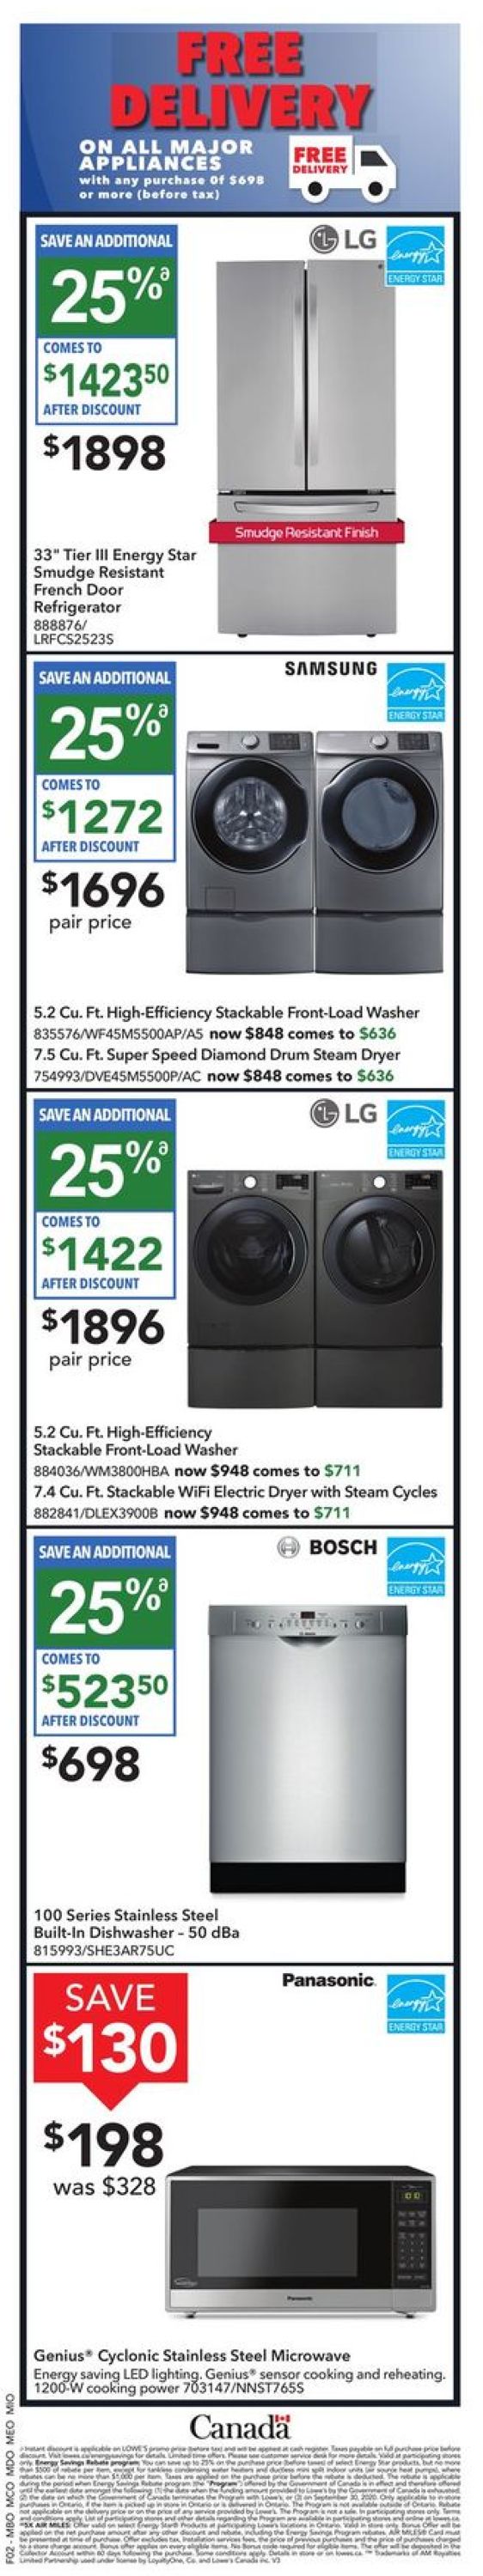 Lowes - PRE-BOXING WEEK 2019 SALE Flyer - 12/19-12/25/2019 (Page 2)